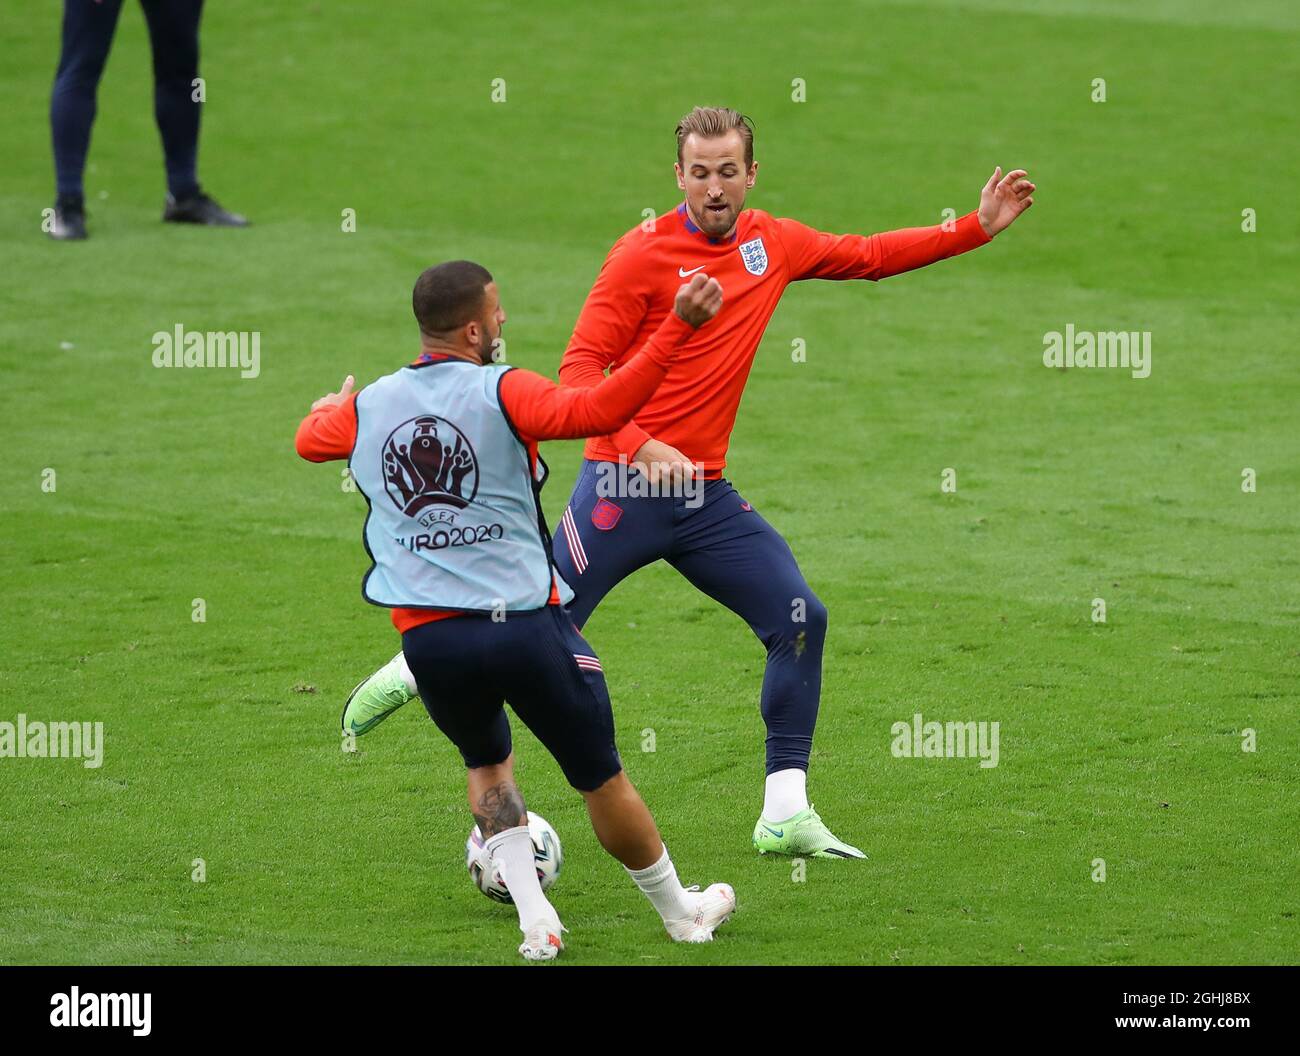 London, England, 22nd June 2021. Harry Kane of England warms up during the UEFA European Championships match at Wembley Stadium, London. Picture credit should read: David Klein / Sportimage via PA Images Stock Photo